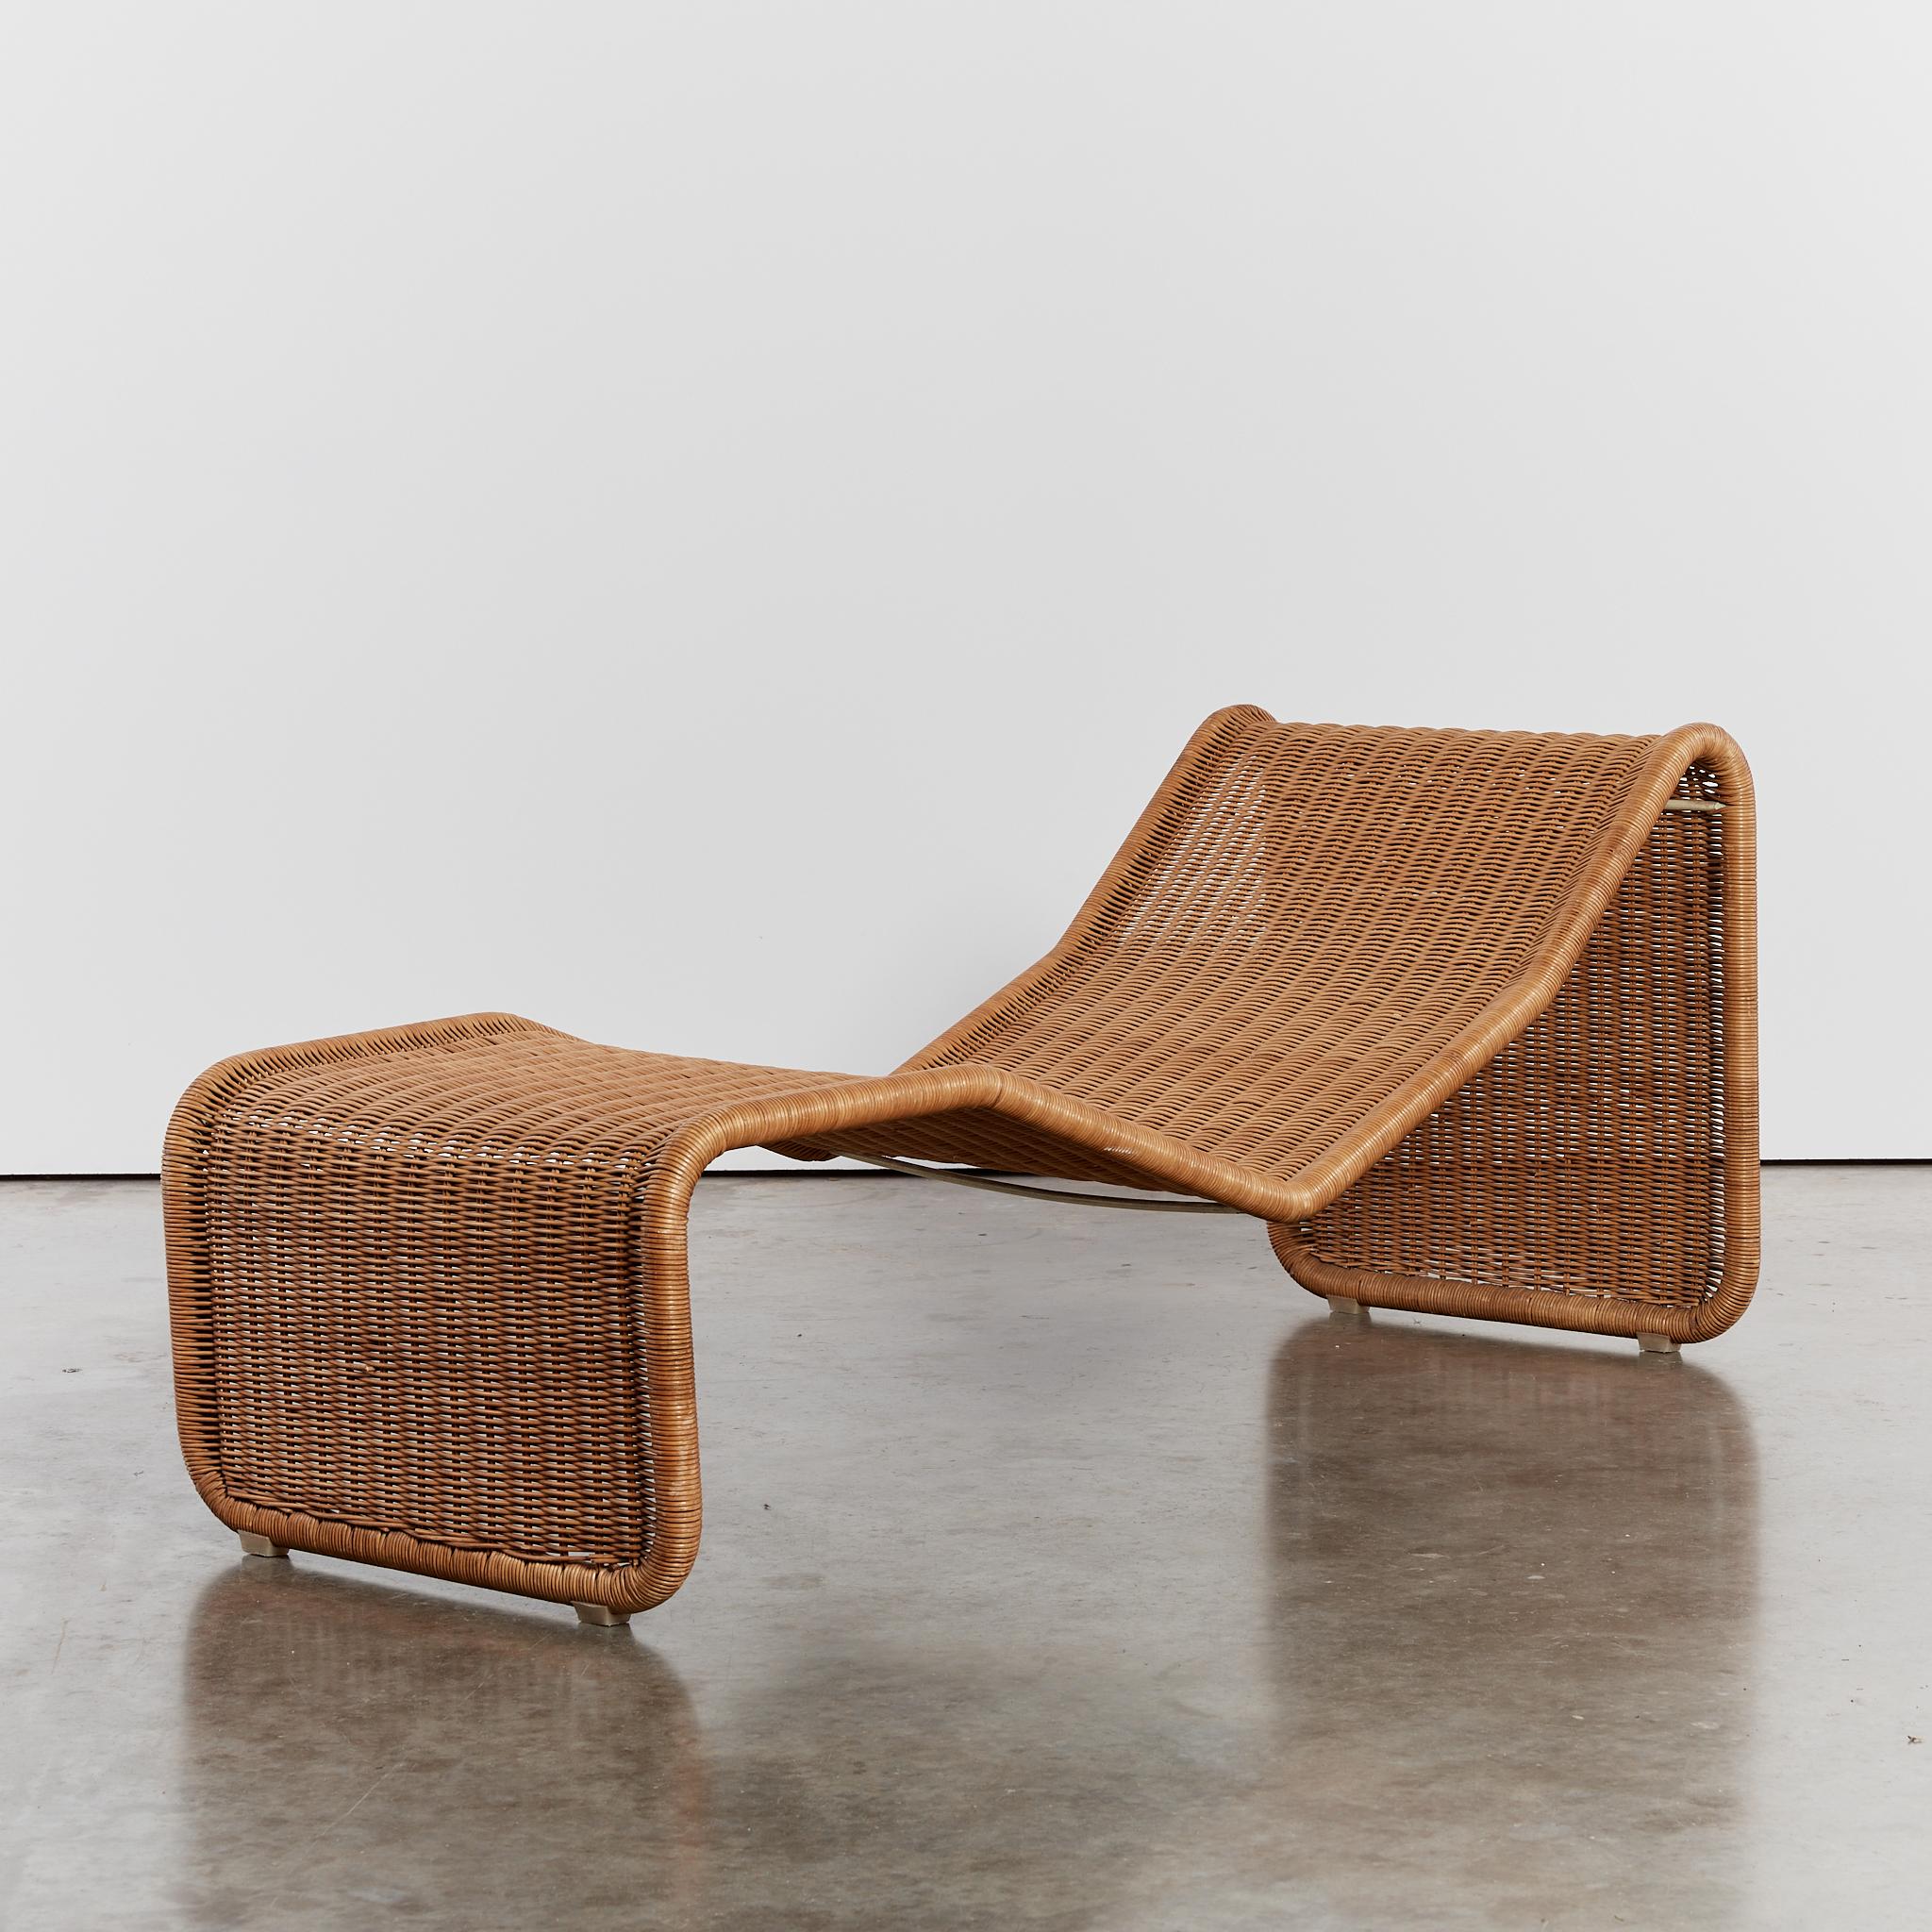 Rare P3 rattan chaise lounge chair by Tito Agnoli for Bocacina 1960's For Sale 1